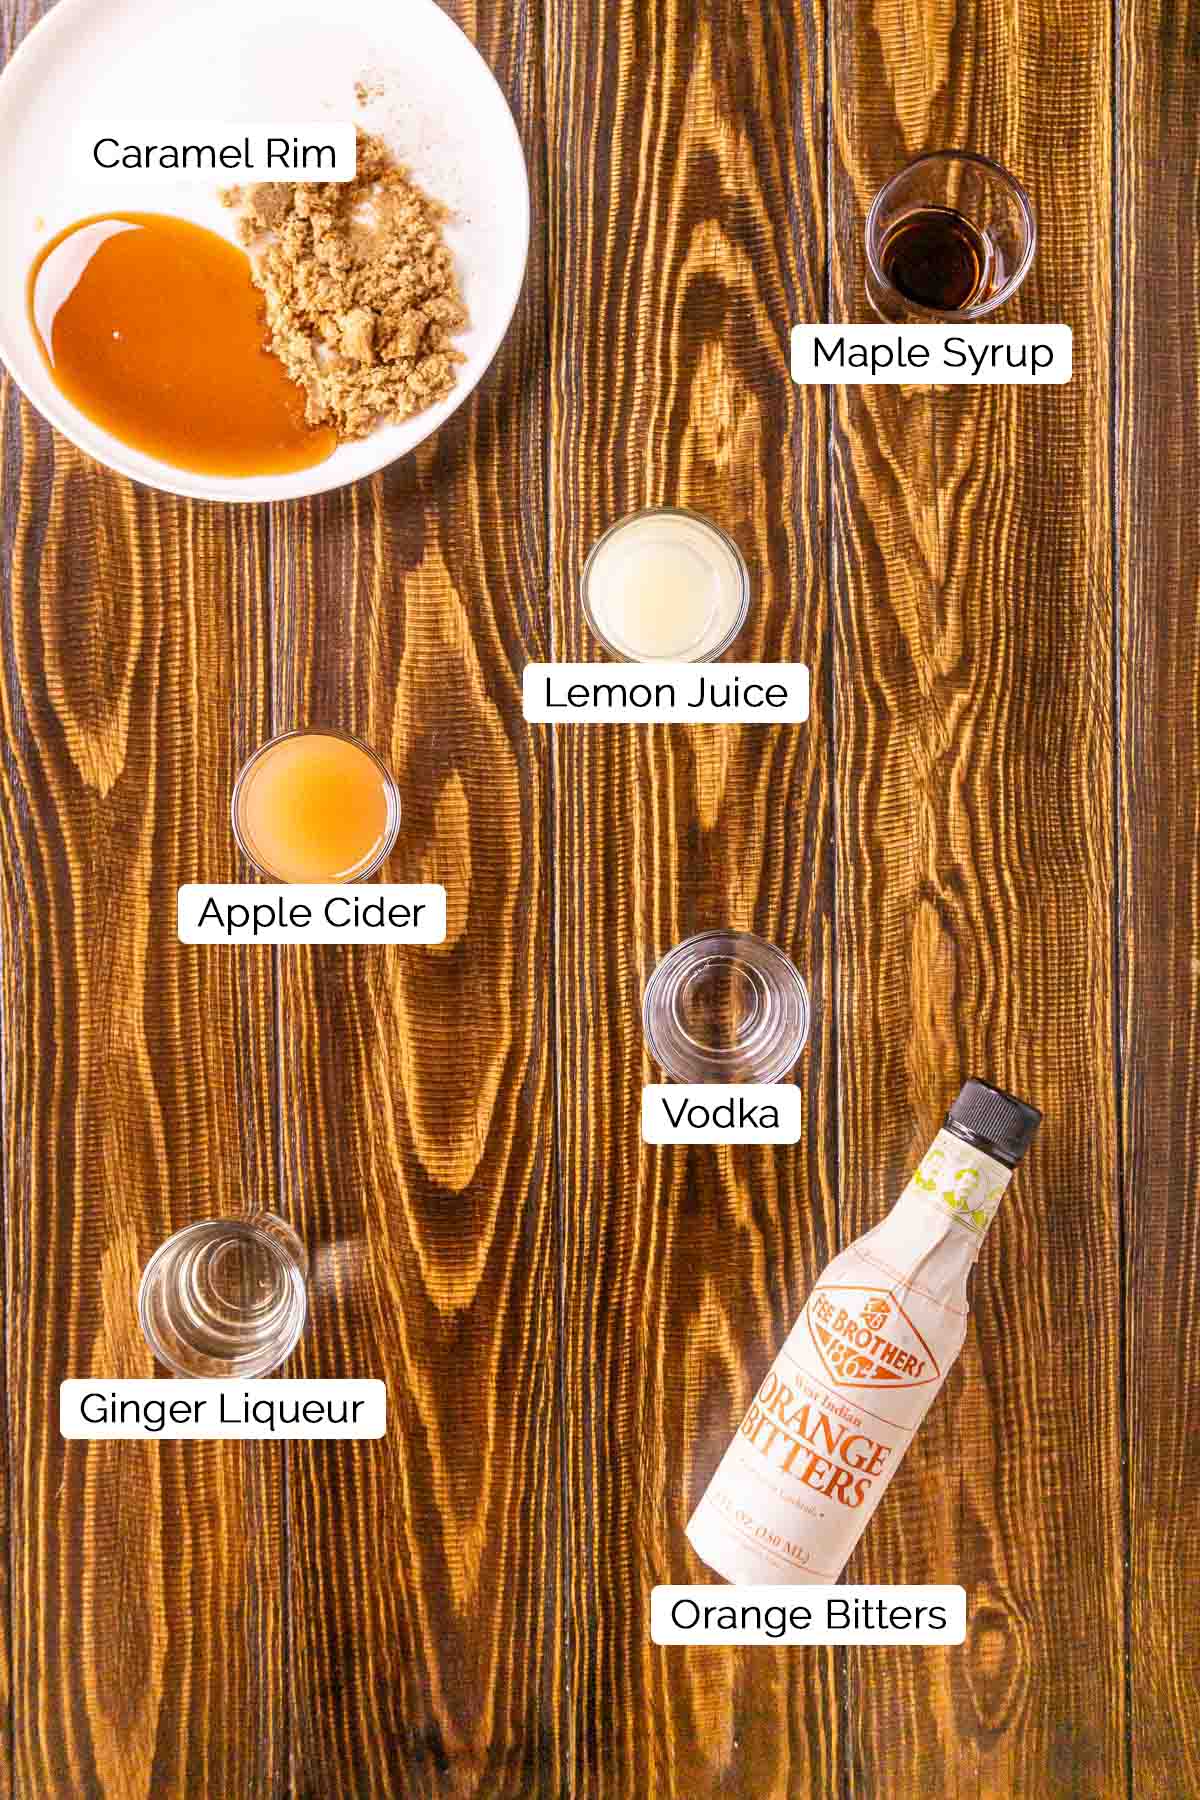 The drink ingredients on a brown wooden surface with black and white labels by the items.